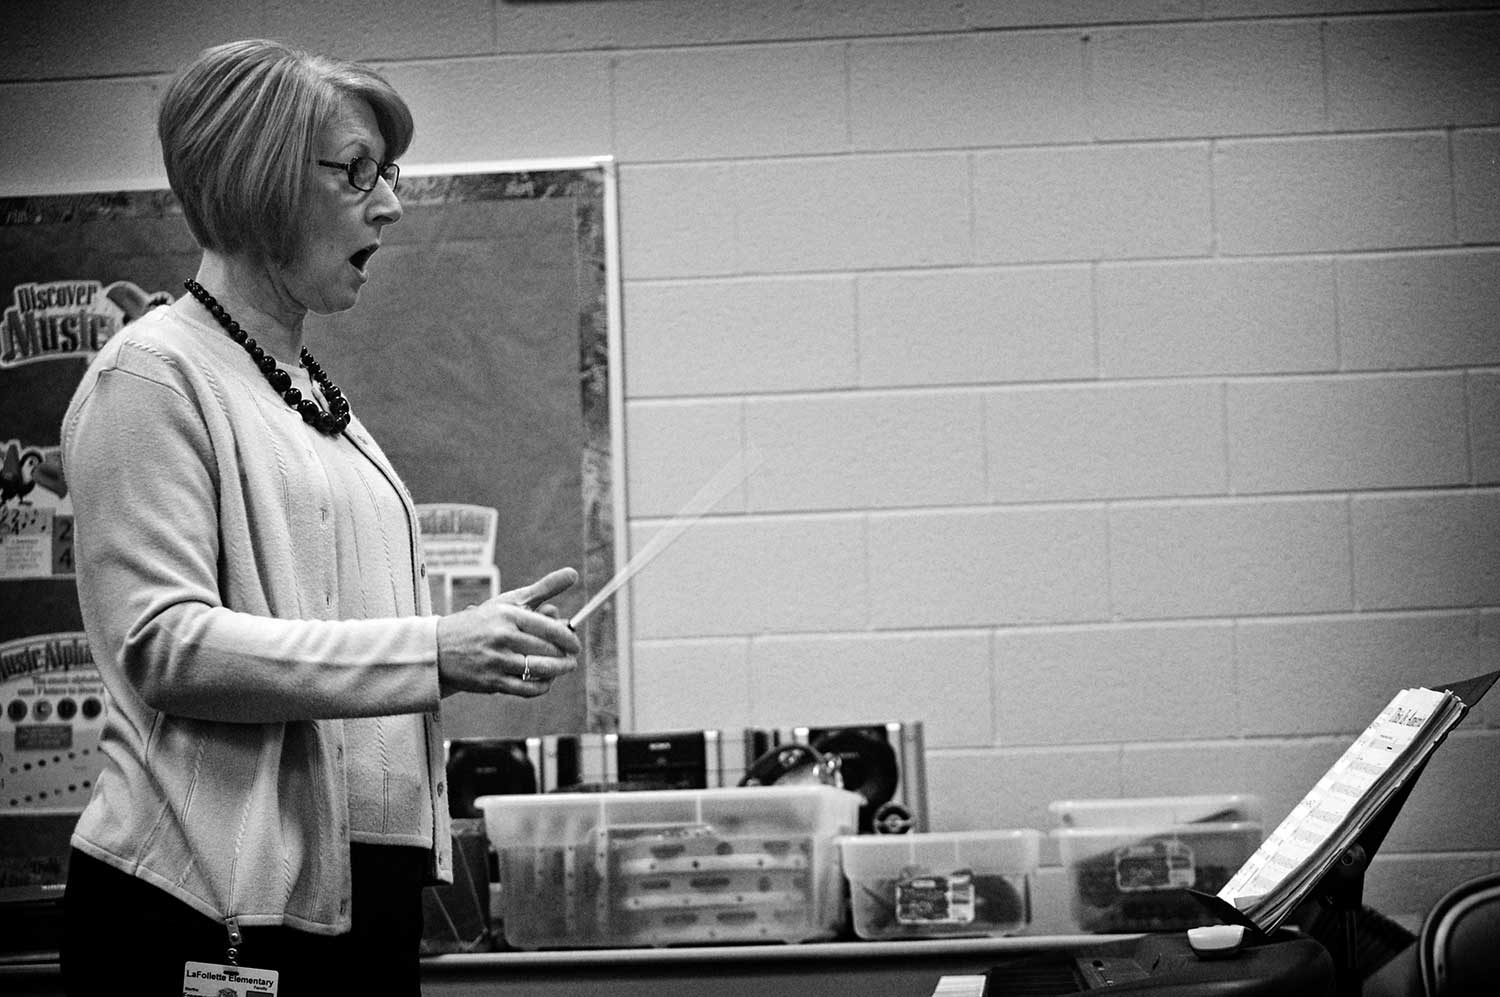 Martha Freeman directs a fifth grade class, which is preparing for an upcoming choral performance. photo by Jordon Vest - 2009